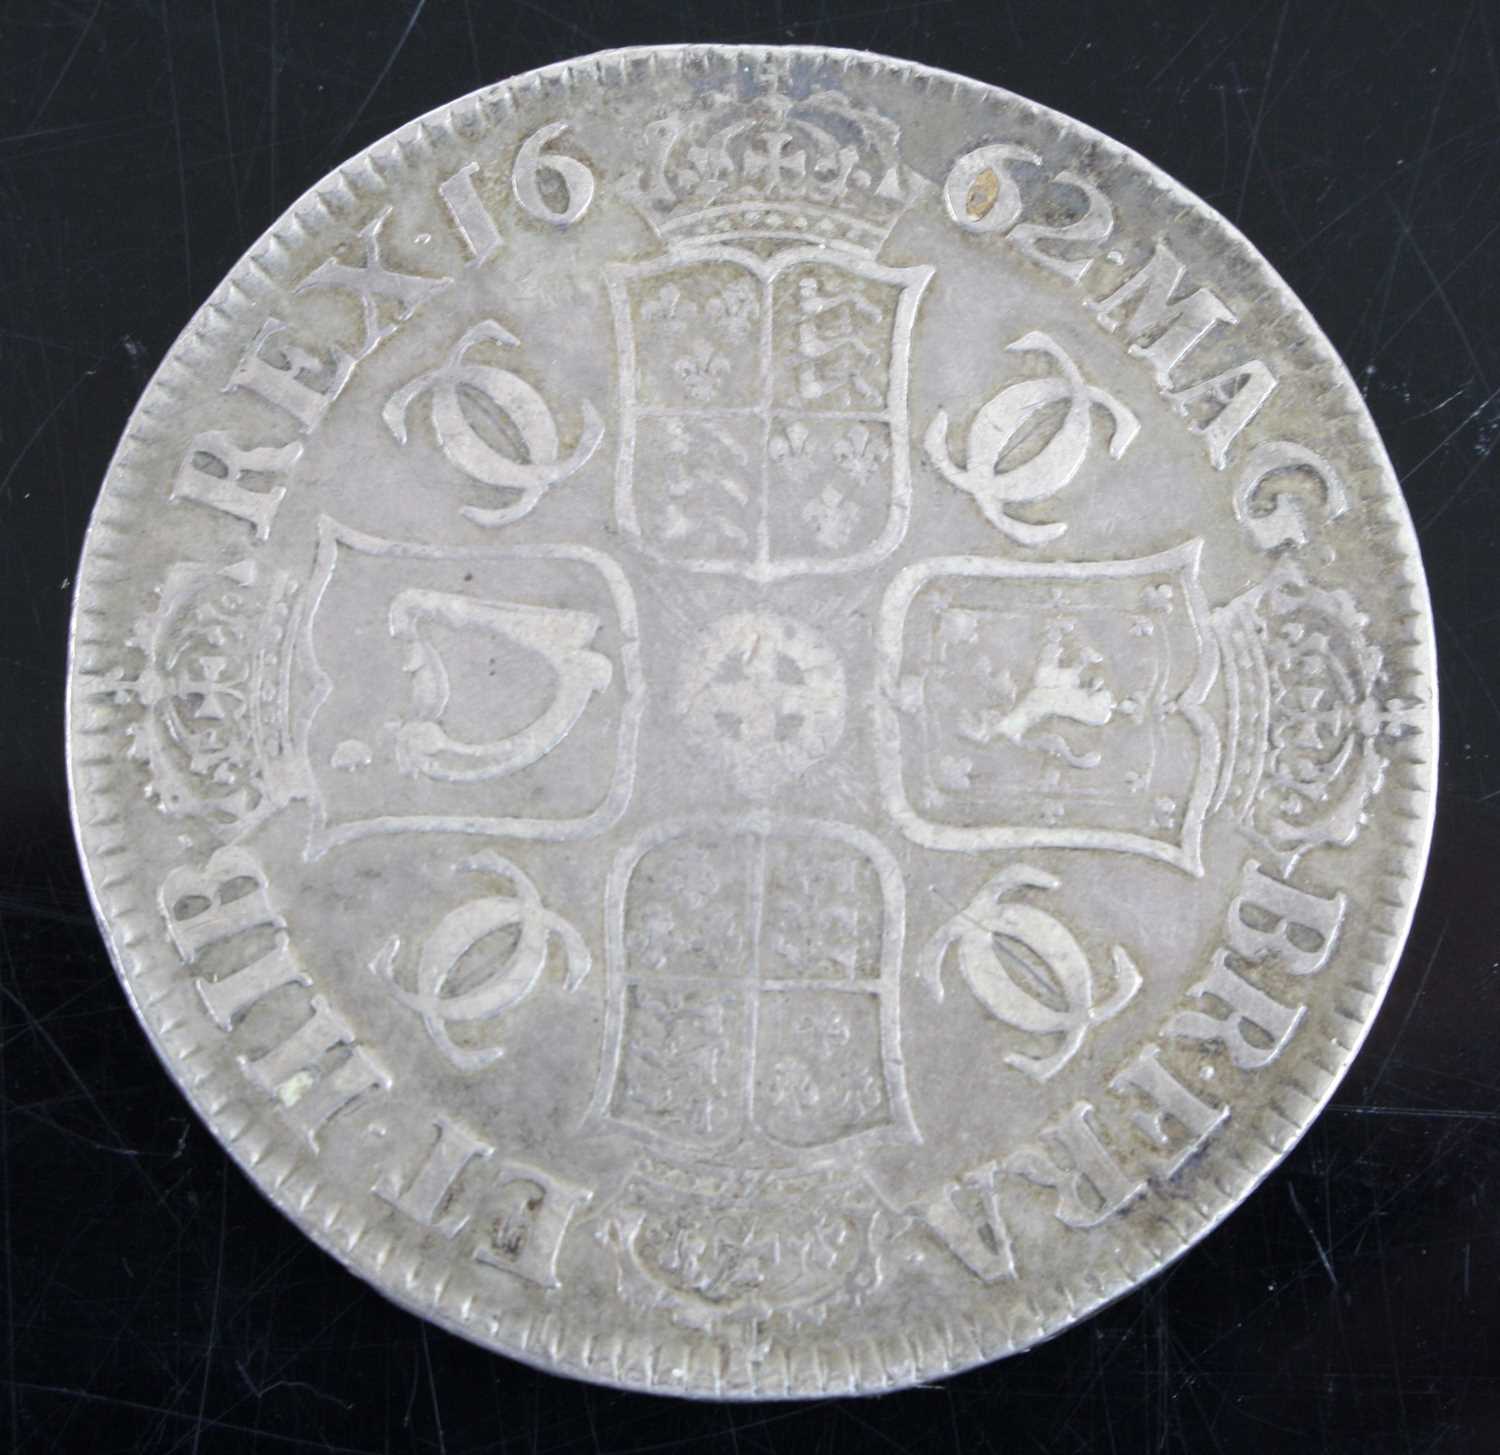 England, 1662 crown, Charles II laureate and draped bust above rose, rev. crowned cruciform shields, - Image 2 of 2